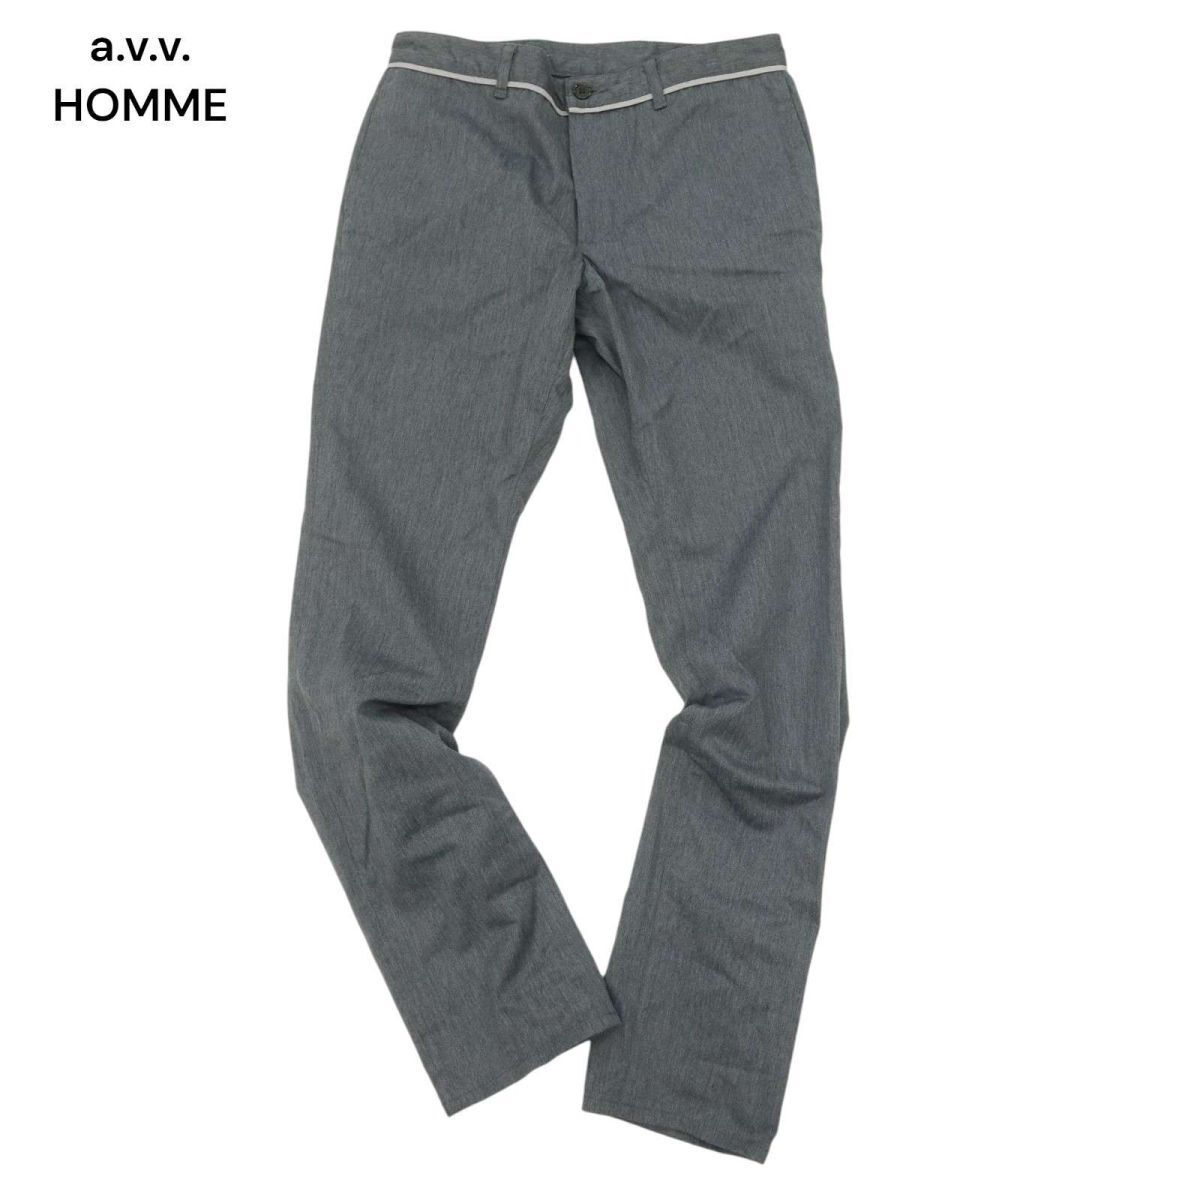 [ new goods unused ] a.v.v. HOMMEa-veve Homme through year stretch * tapered pants Sz.L men's gray C4B01883_4#R